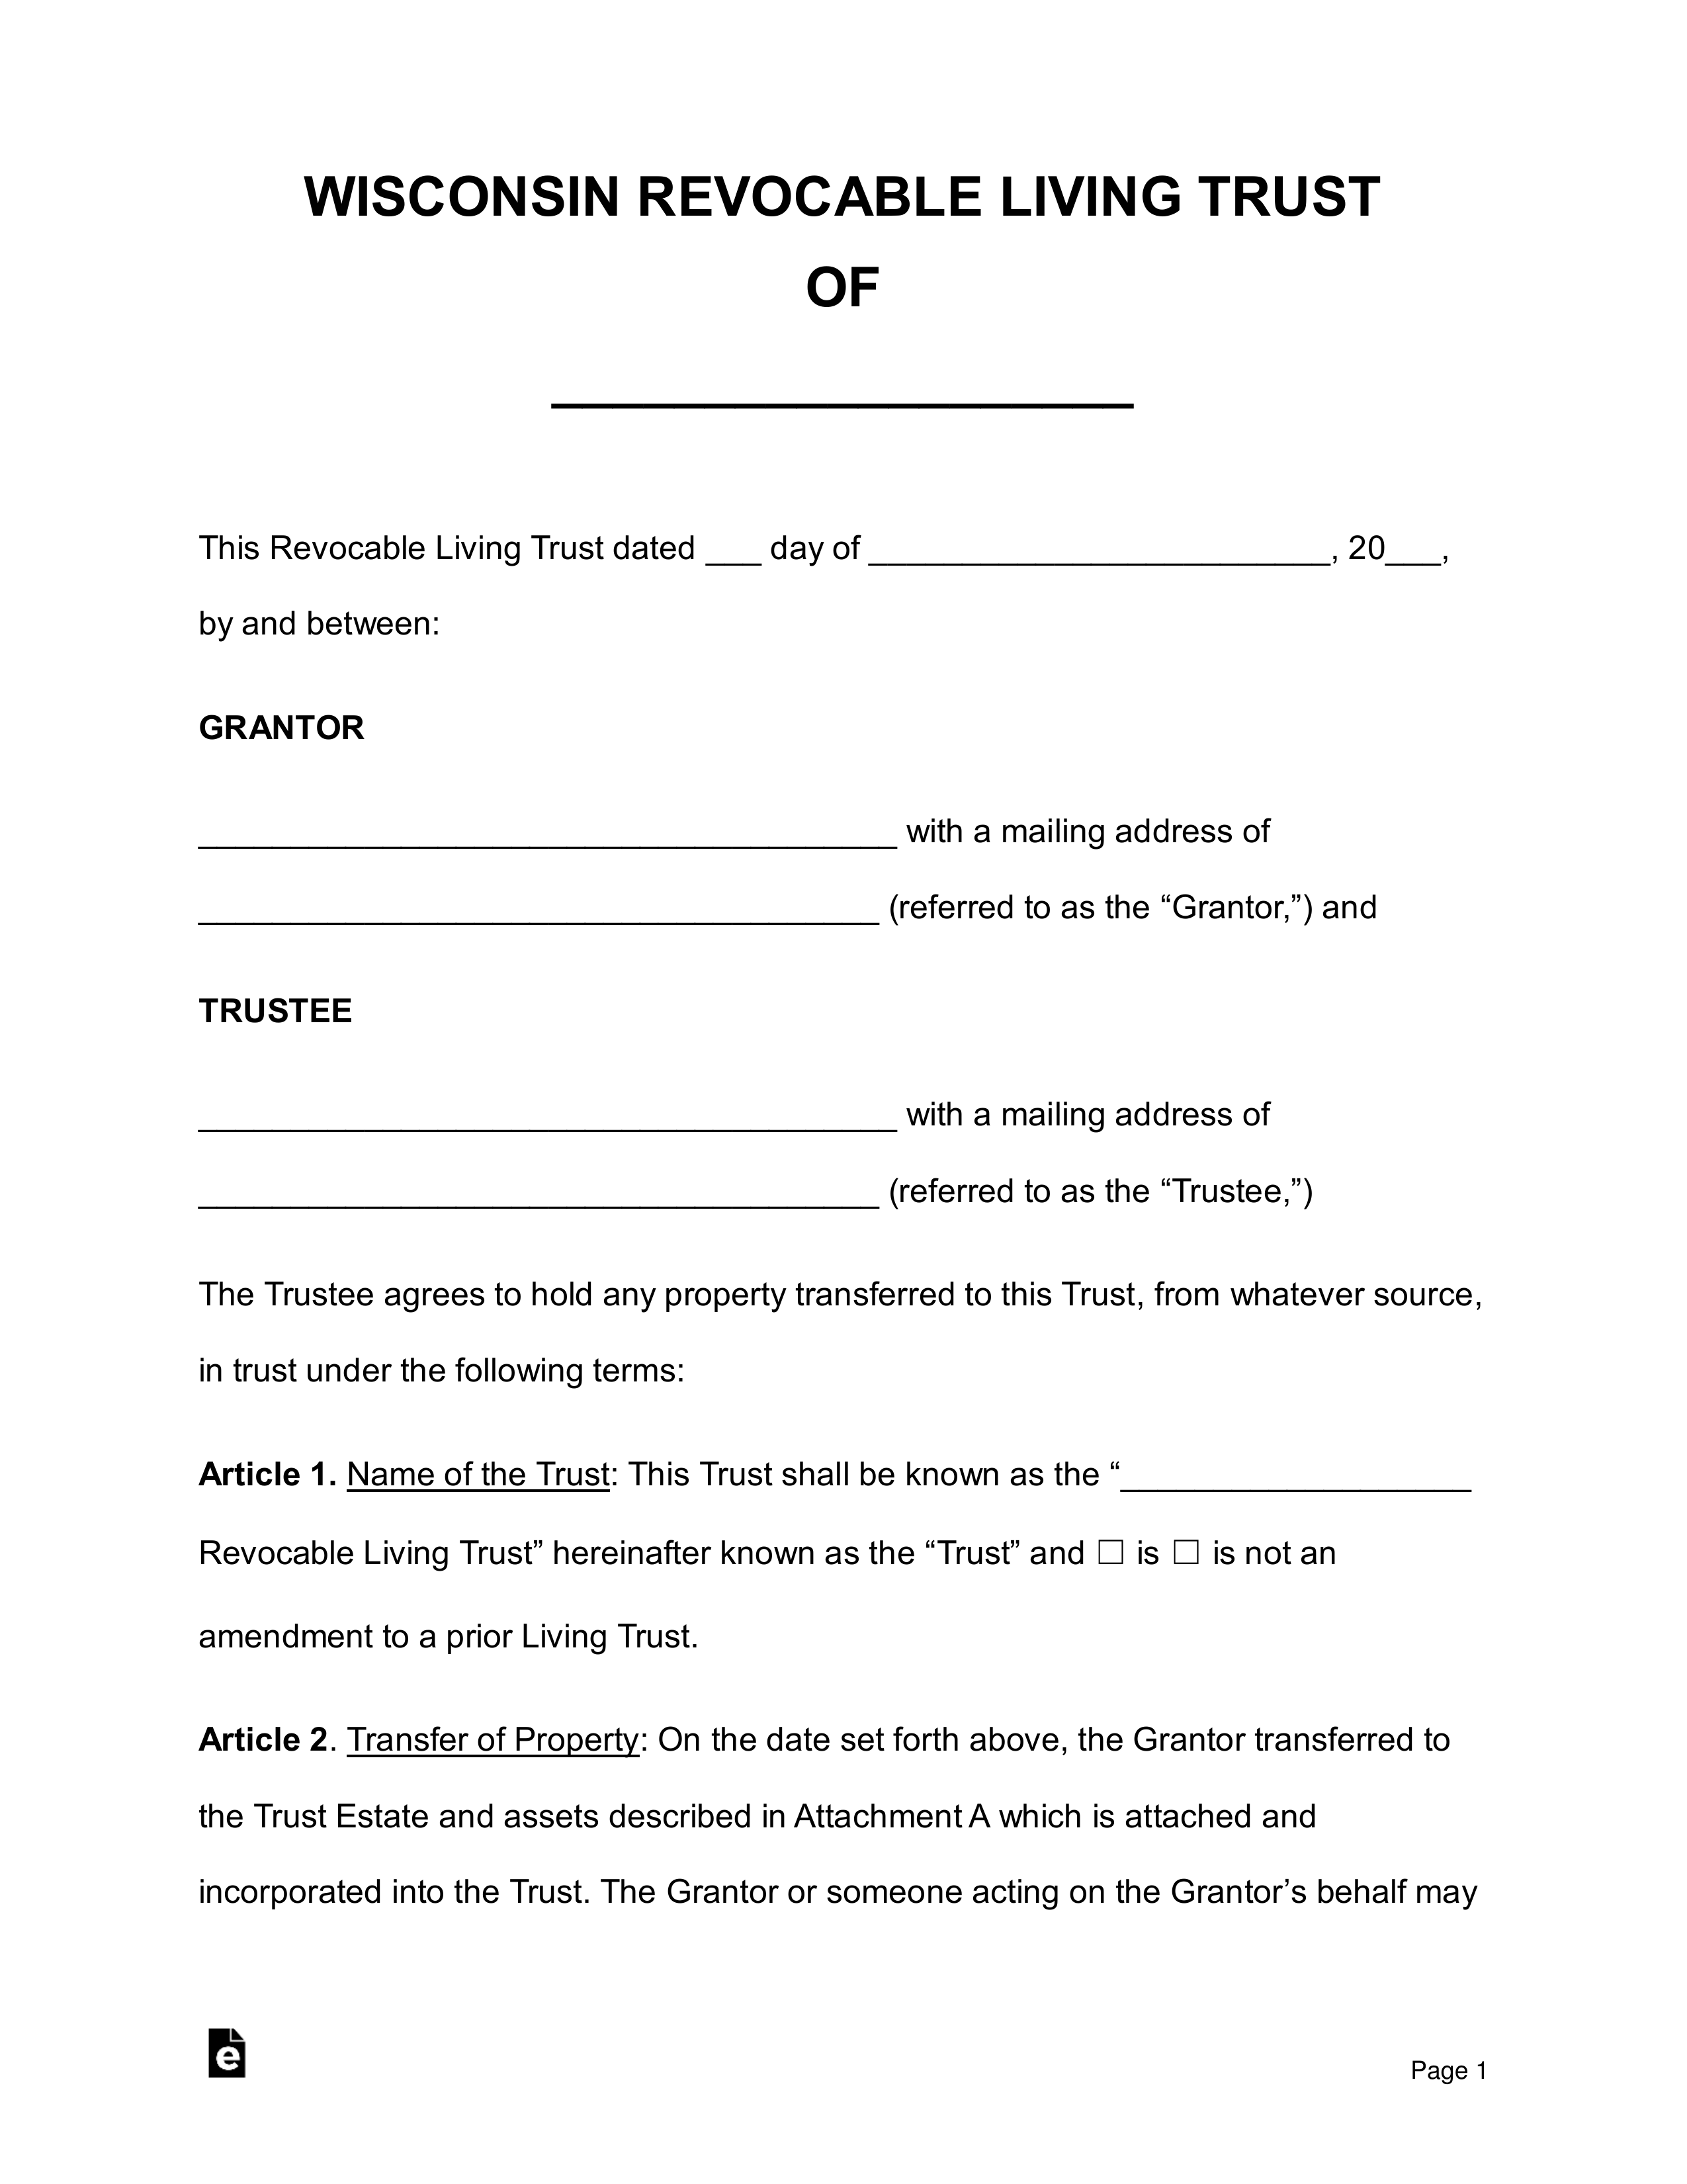 free-wisconsin-revocable-living-trust-form-pdf-word-eforms